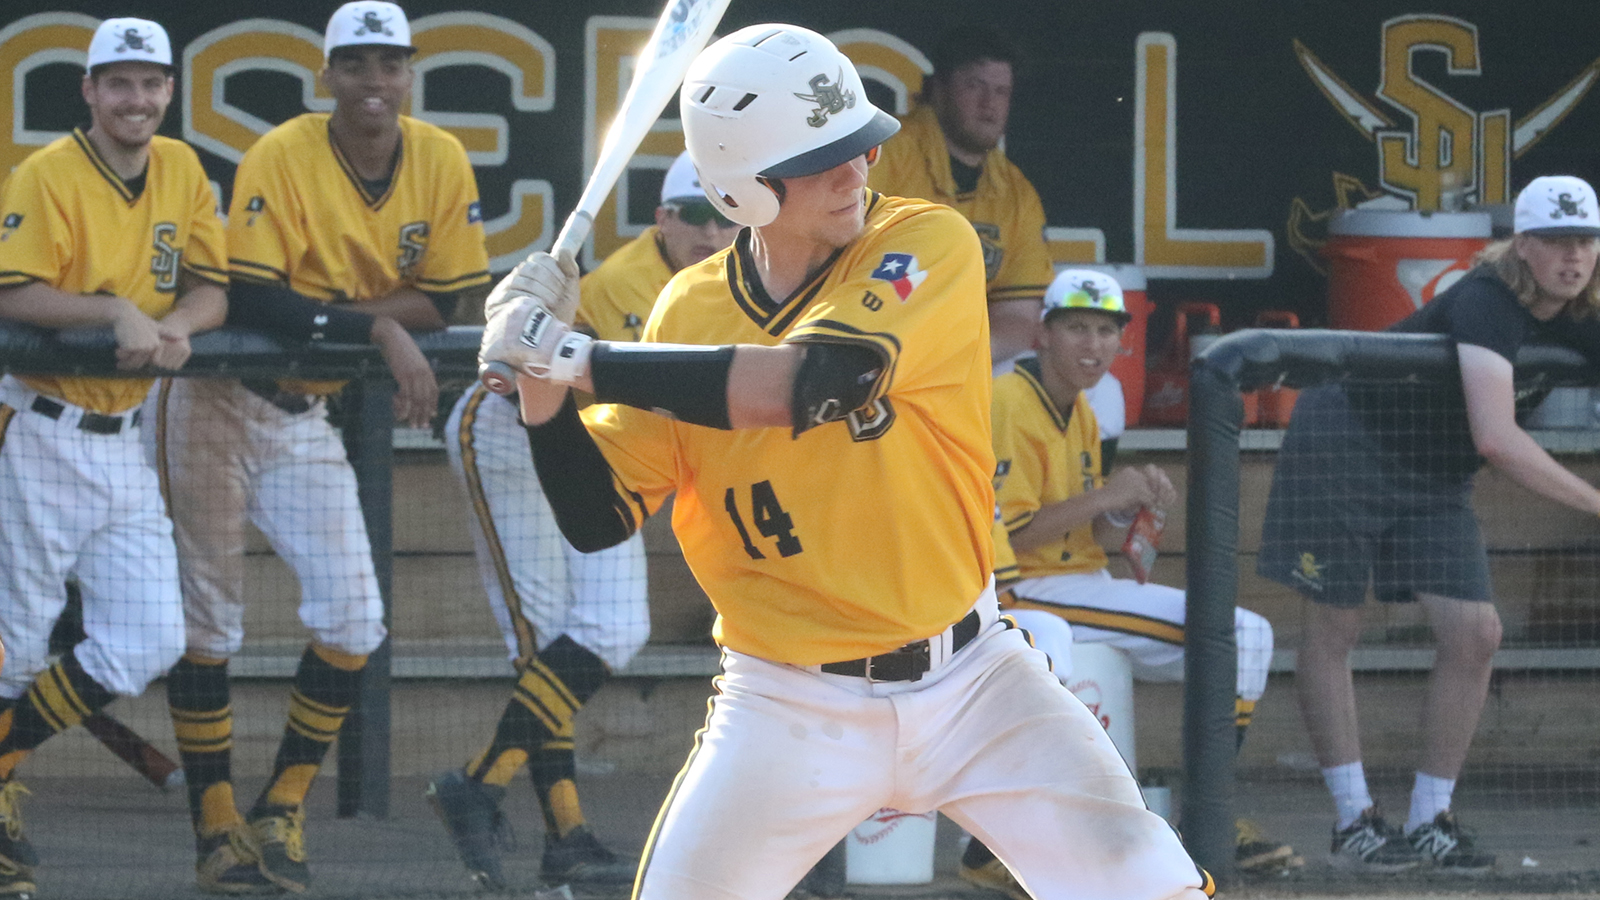 Craig Walks it Off as Pirates Storm Back to Stun UMHB in Extras